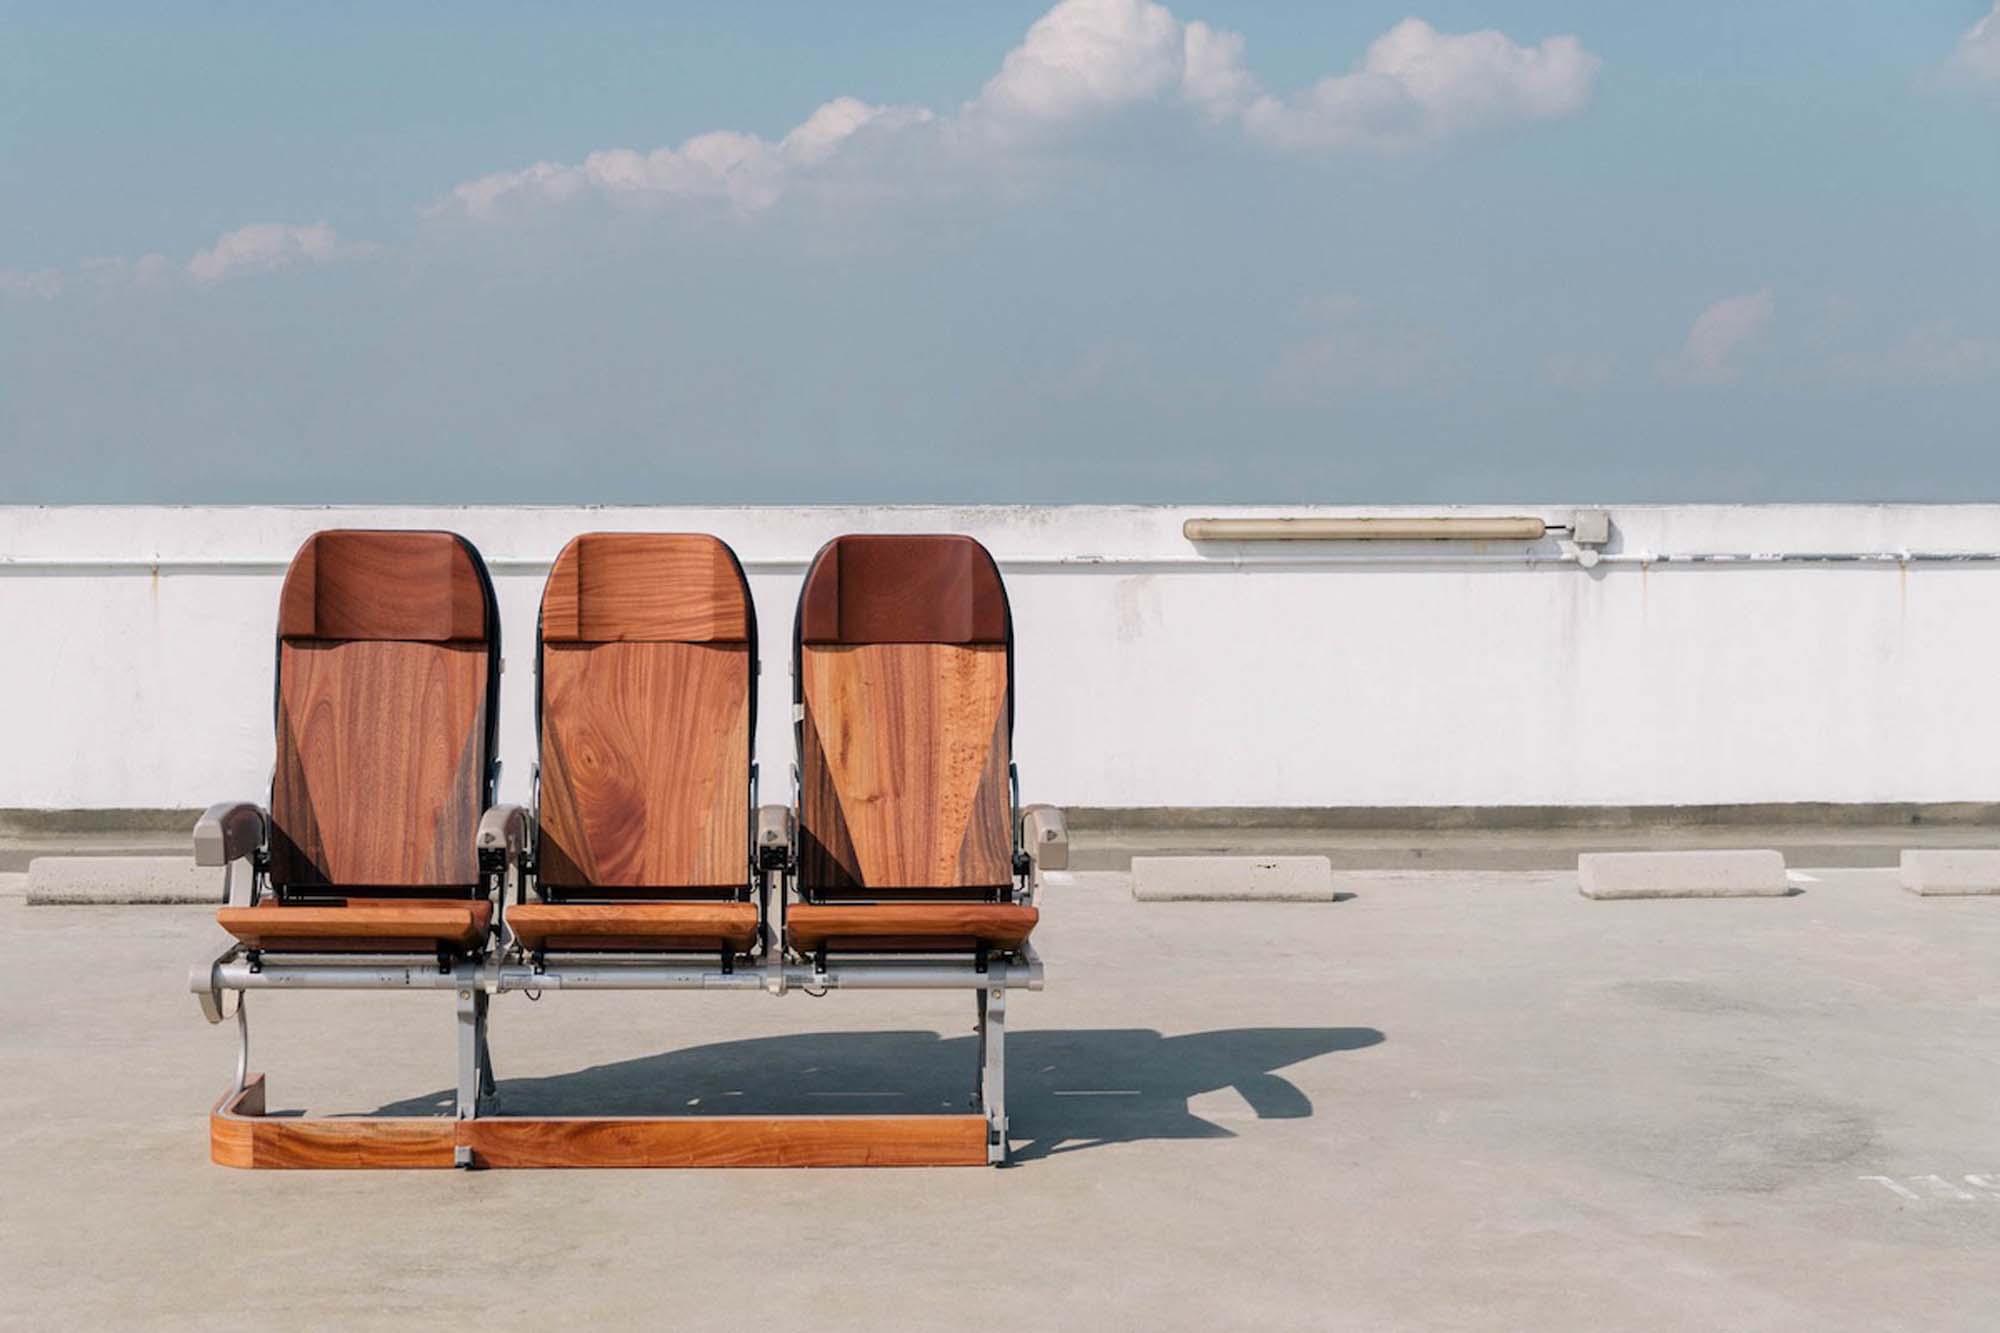 Three-seater airline seats. 